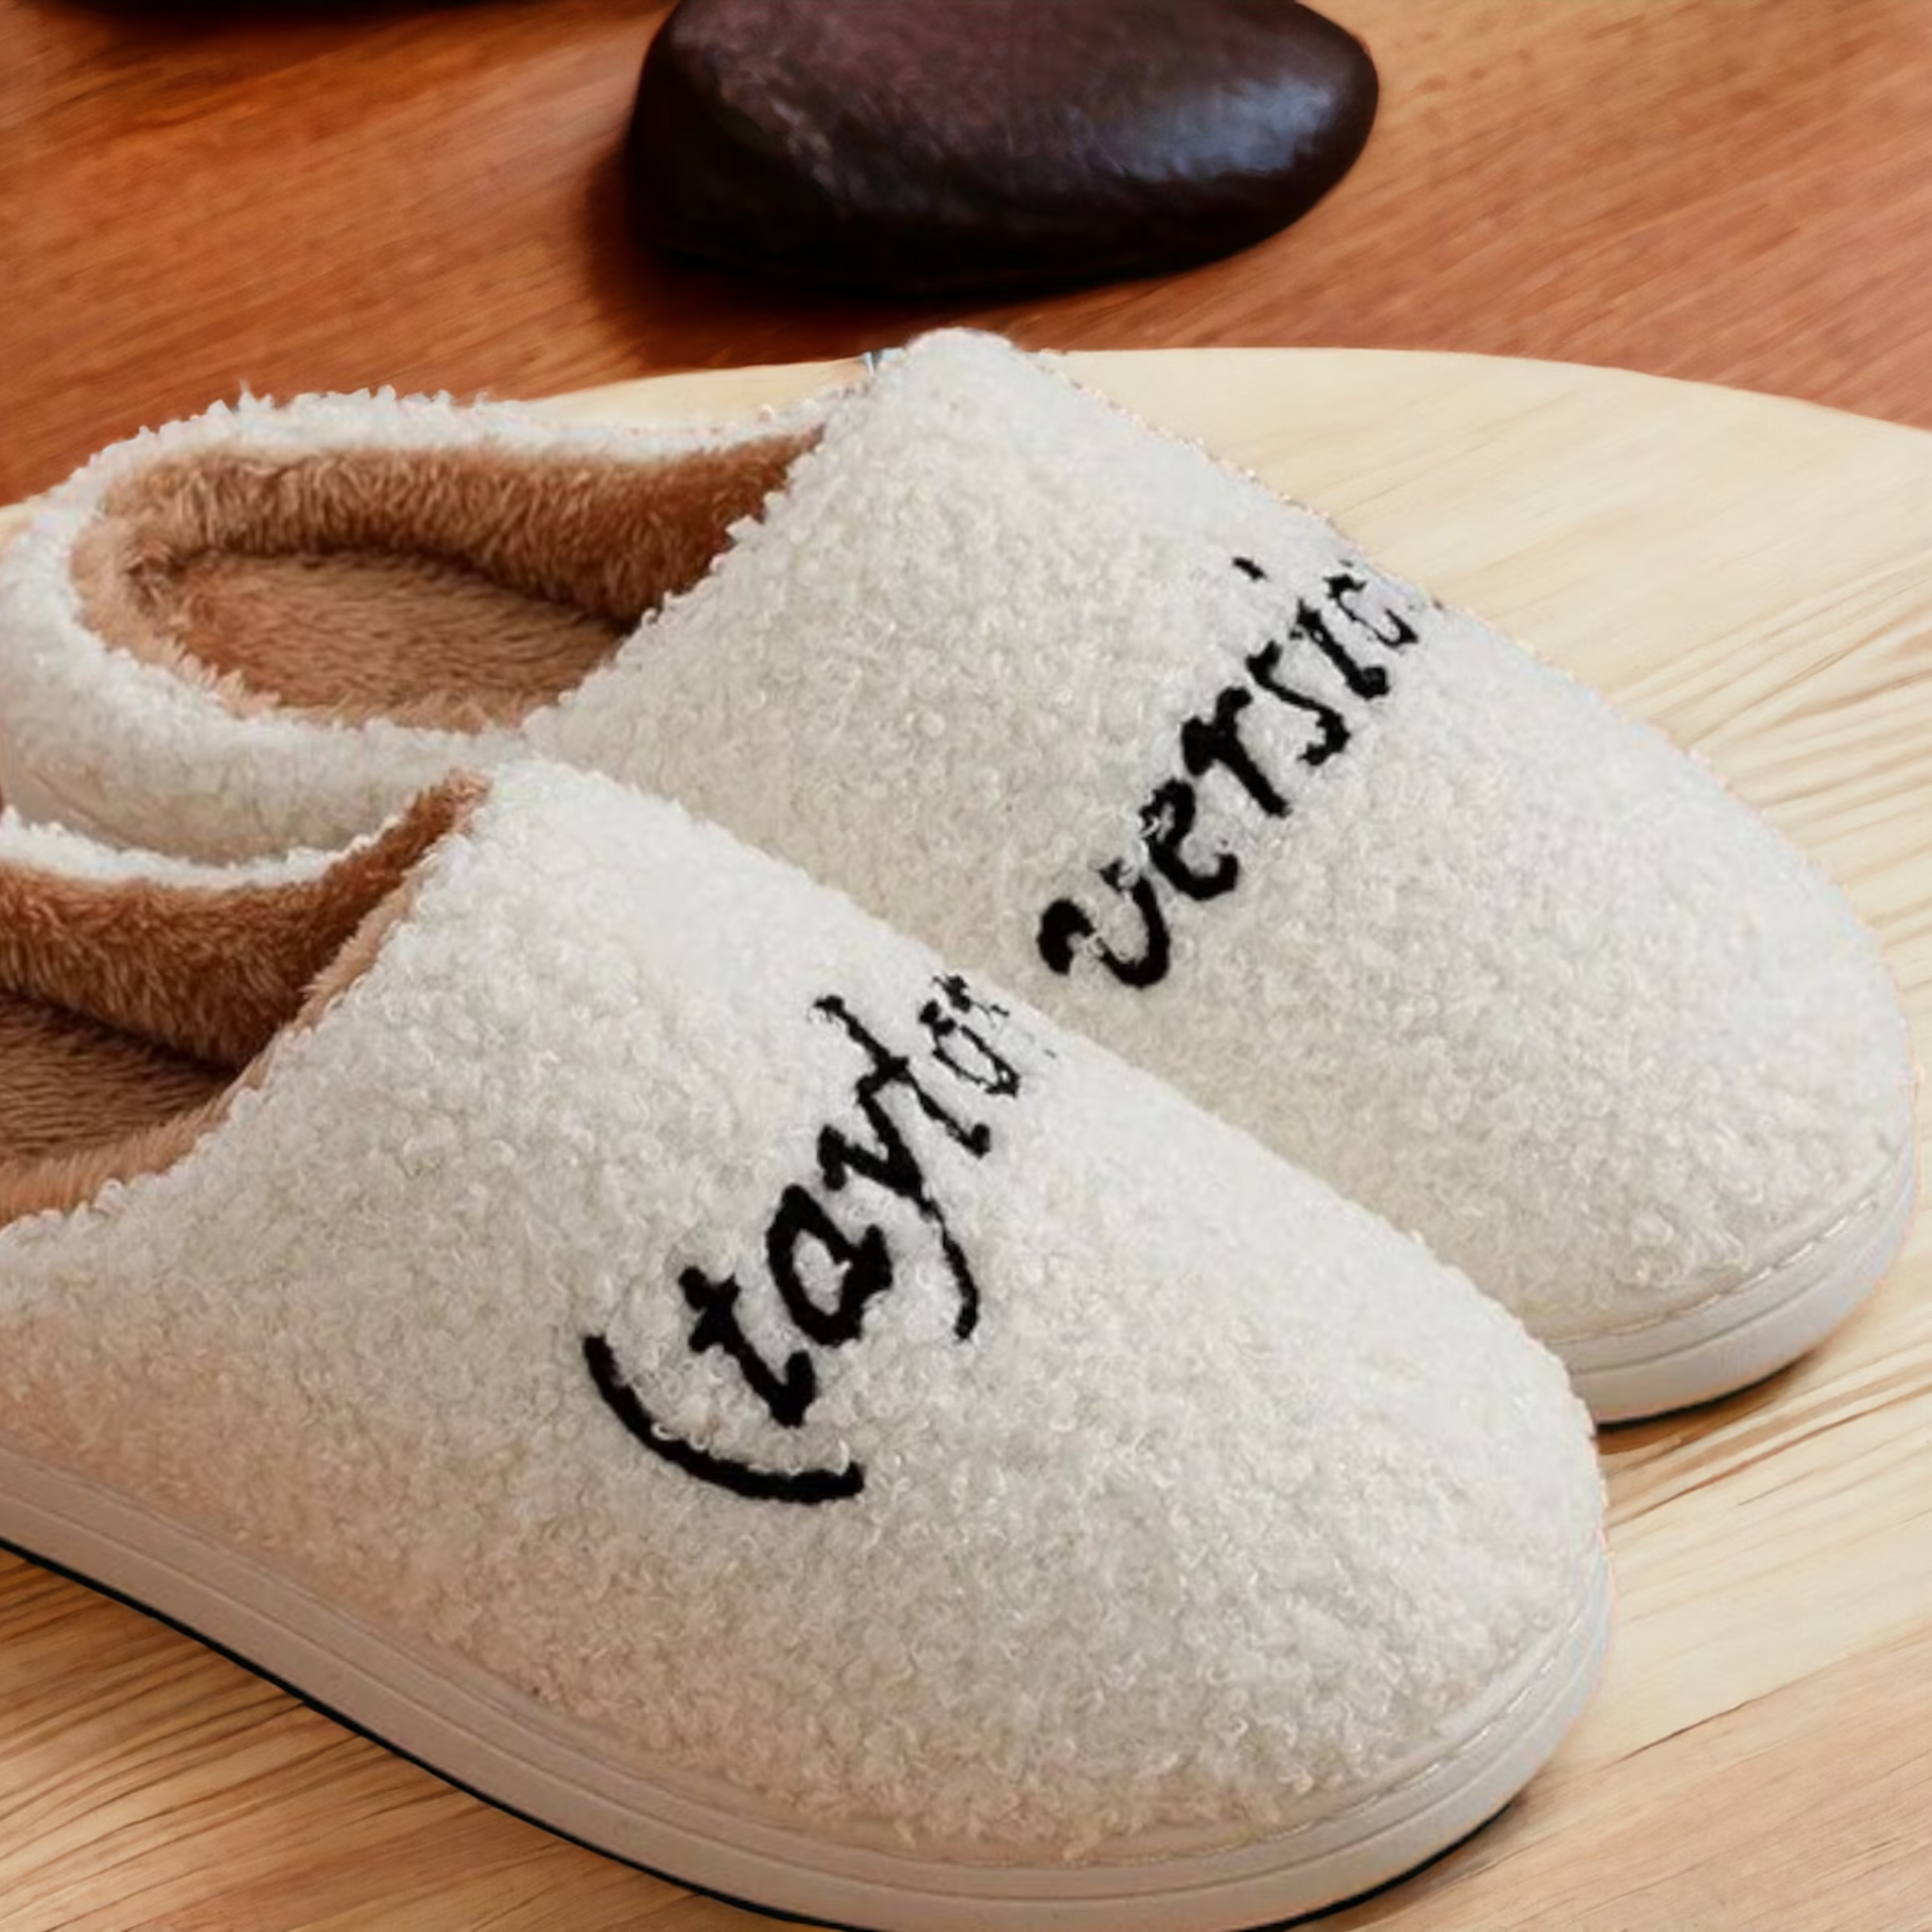 Taylors Version Slippers - Taylor Swift Slippers - Black